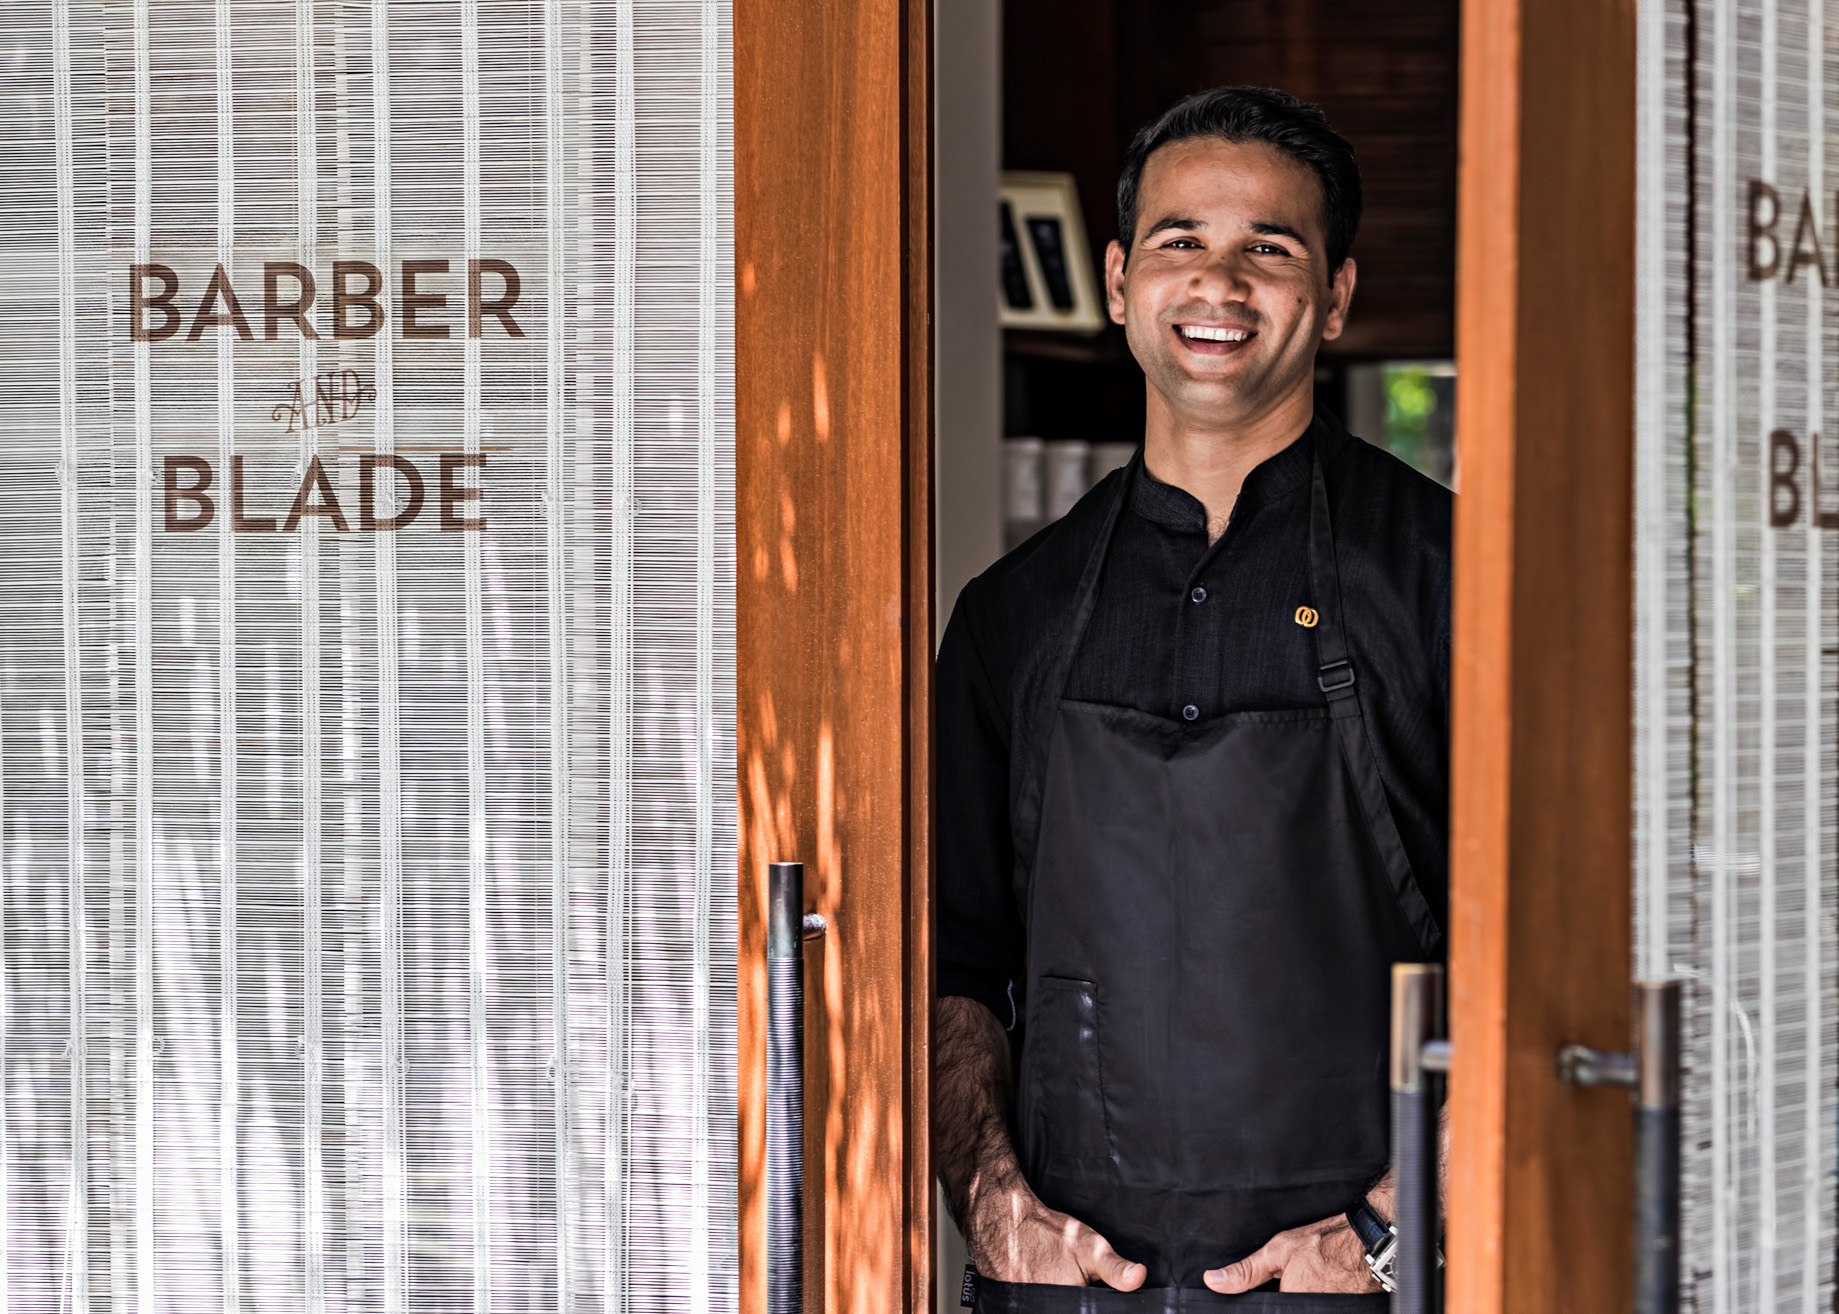 One&Only Reethi Rah Resort - North Male Atoll, Maldives - Barber and Blade